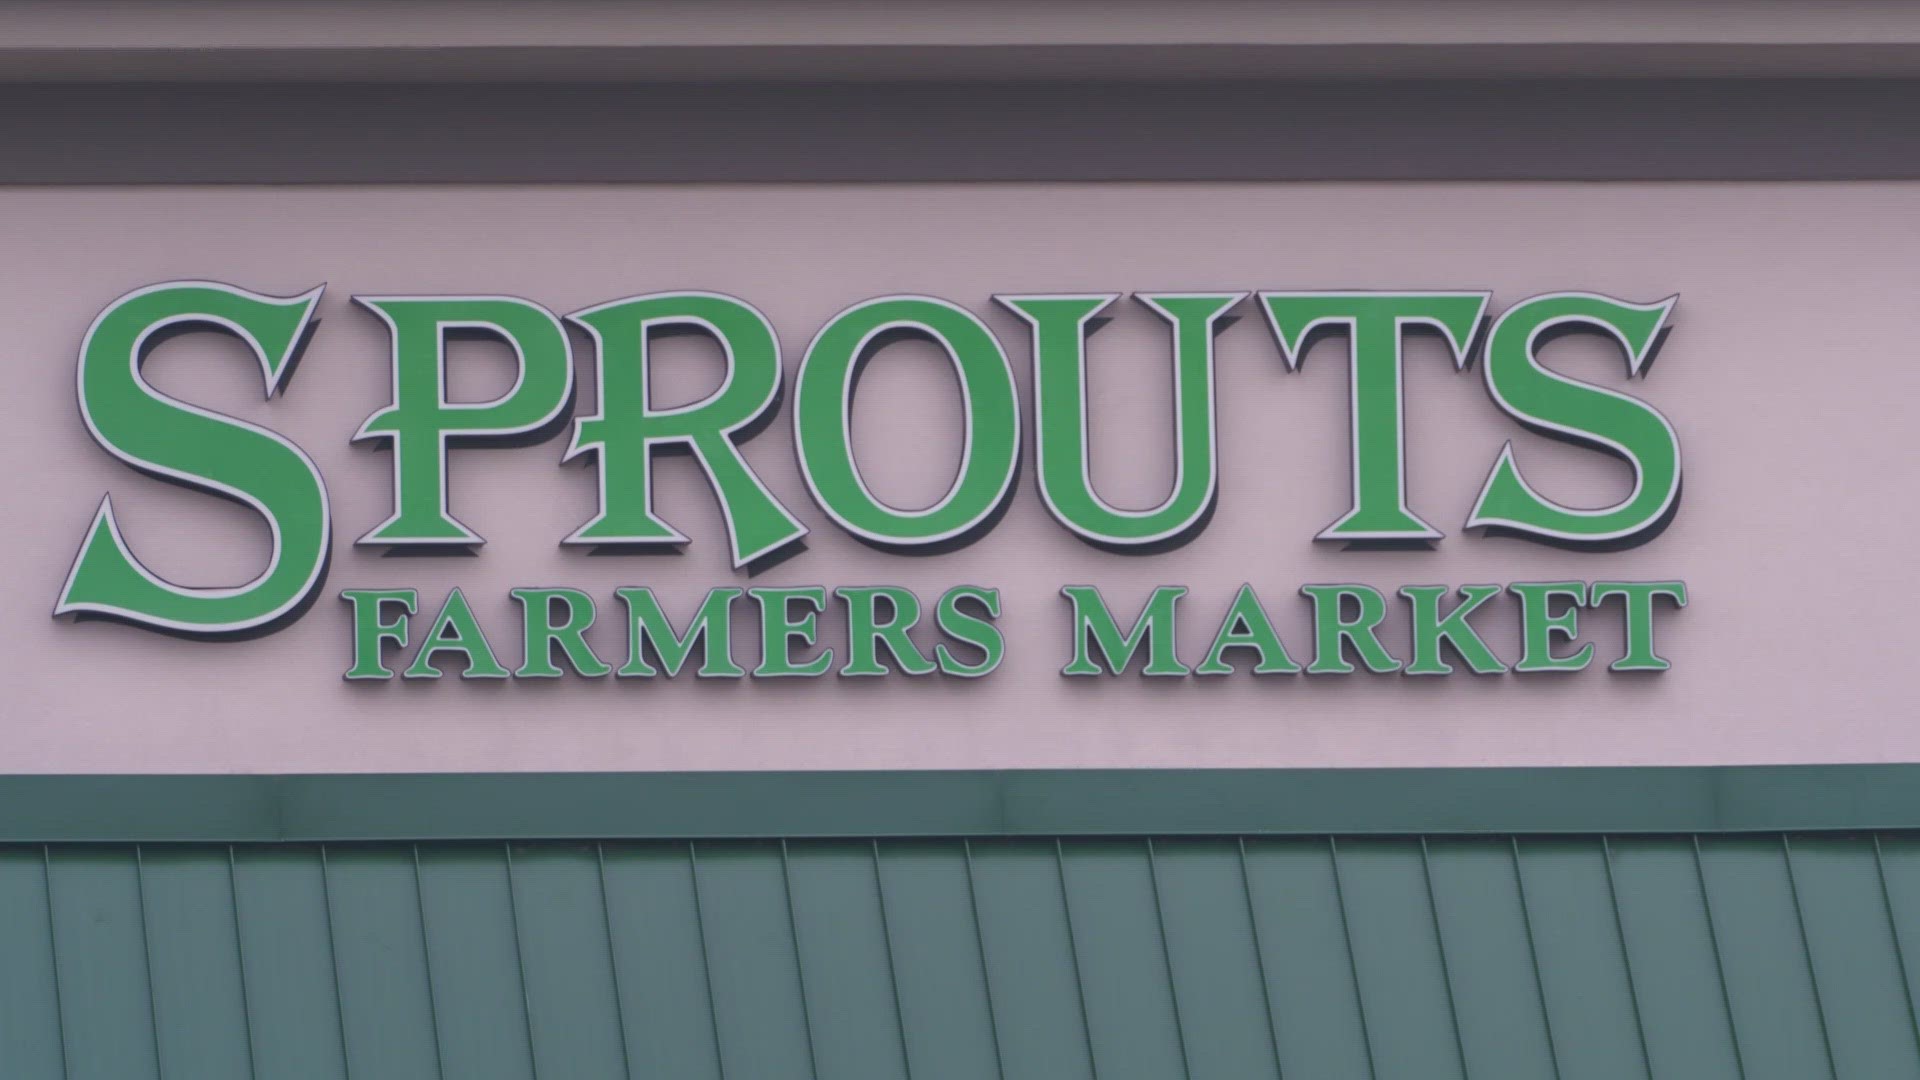 Sprouts, which has a focus on organic and natural foods, has more than 380 stores nationwide with around 31,000 employees.